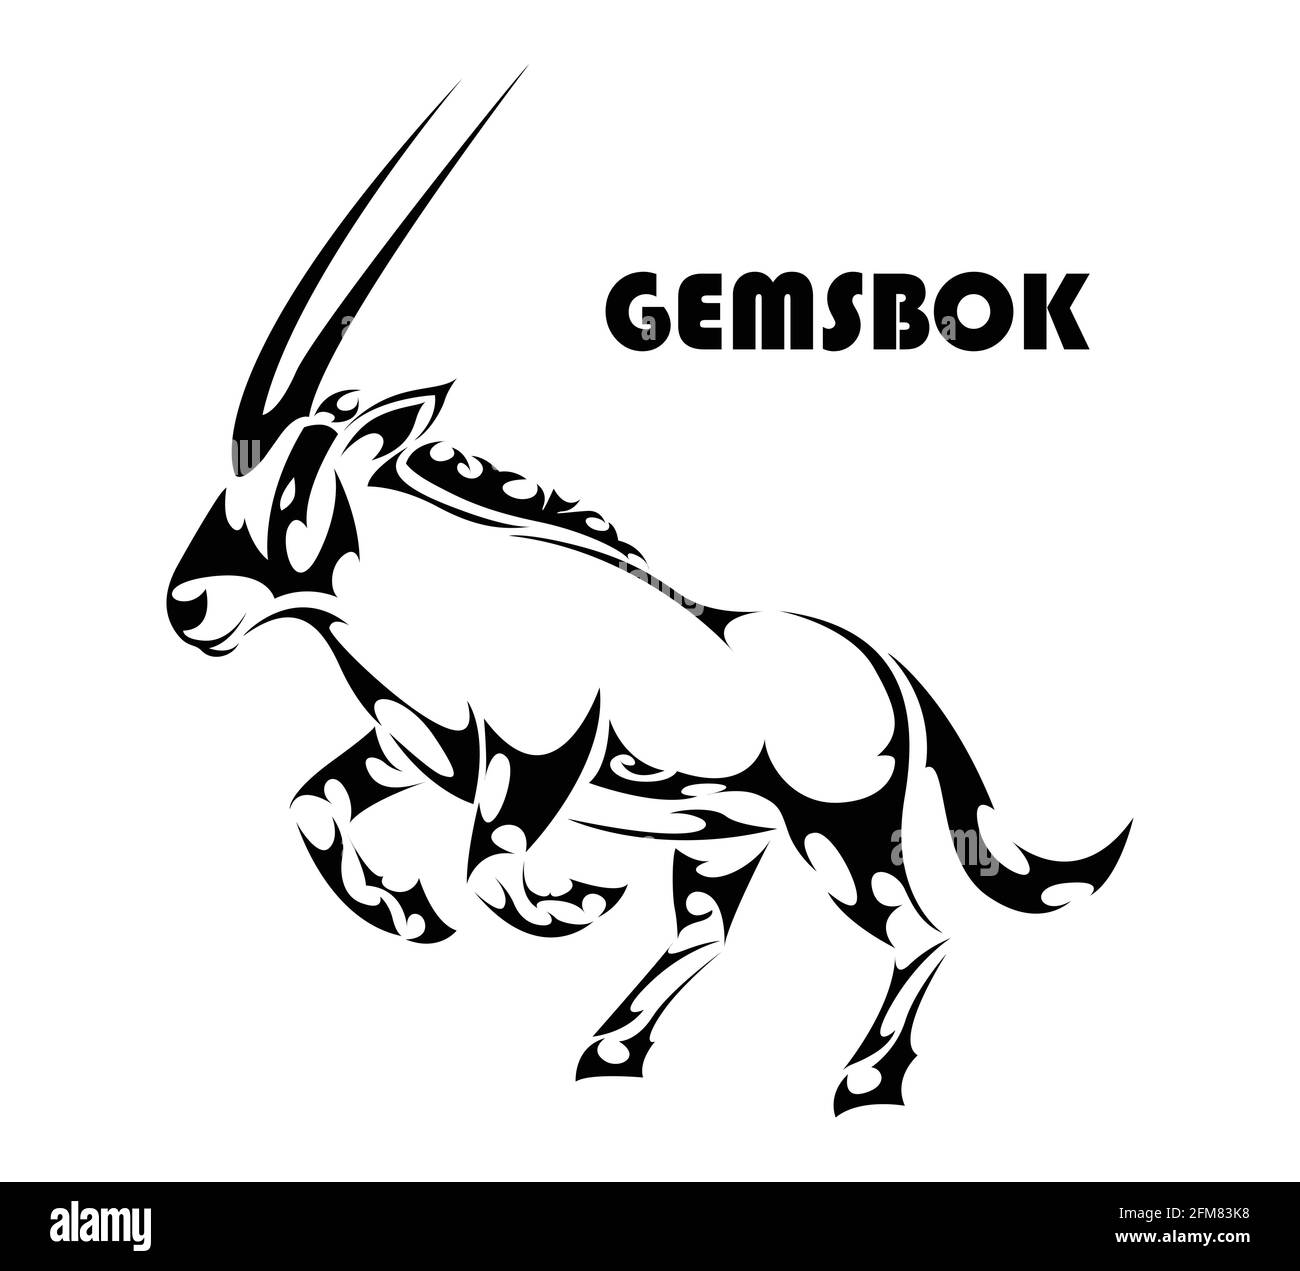 Vector illustration of a gemsbok raising two front legs to prepare to run. It looks strong and powerful. Suitable for use in logos or decorations. Stock Vector